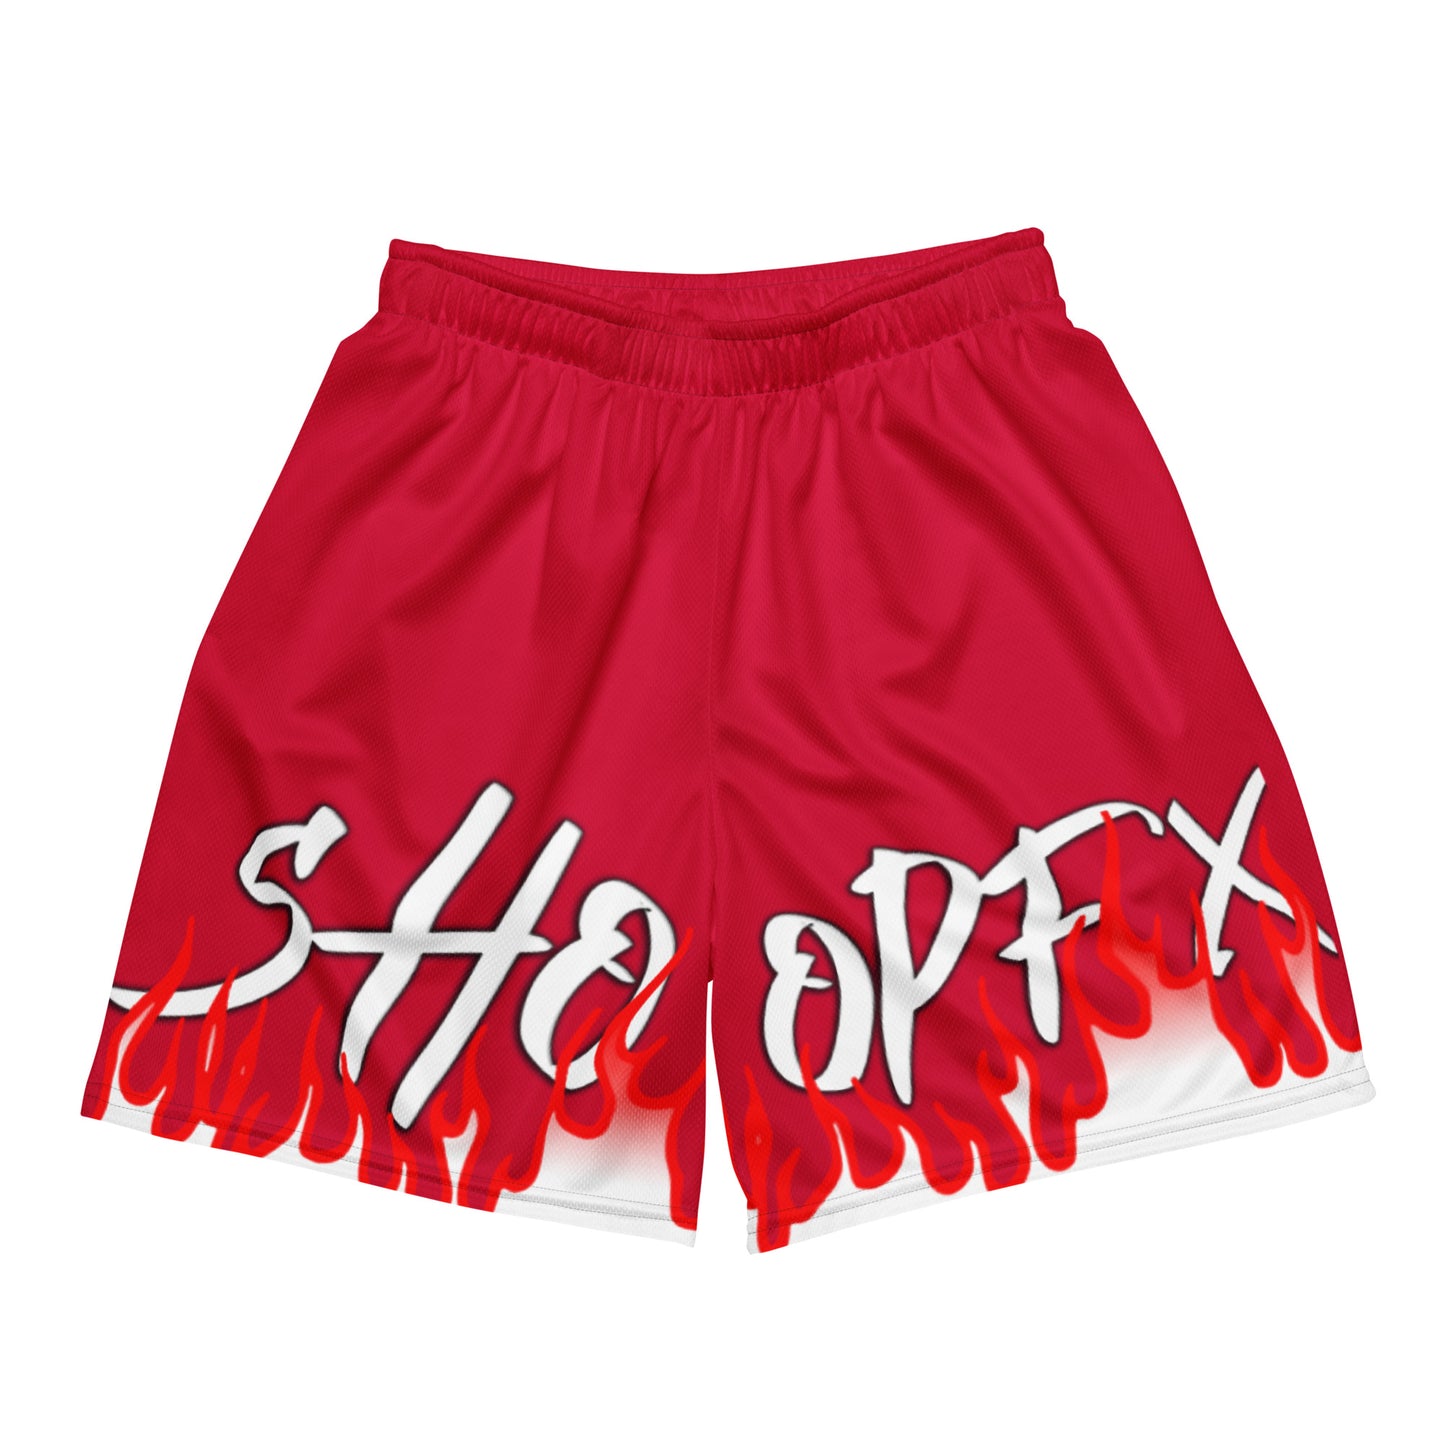 RED GRADIENT MESH SHORTS